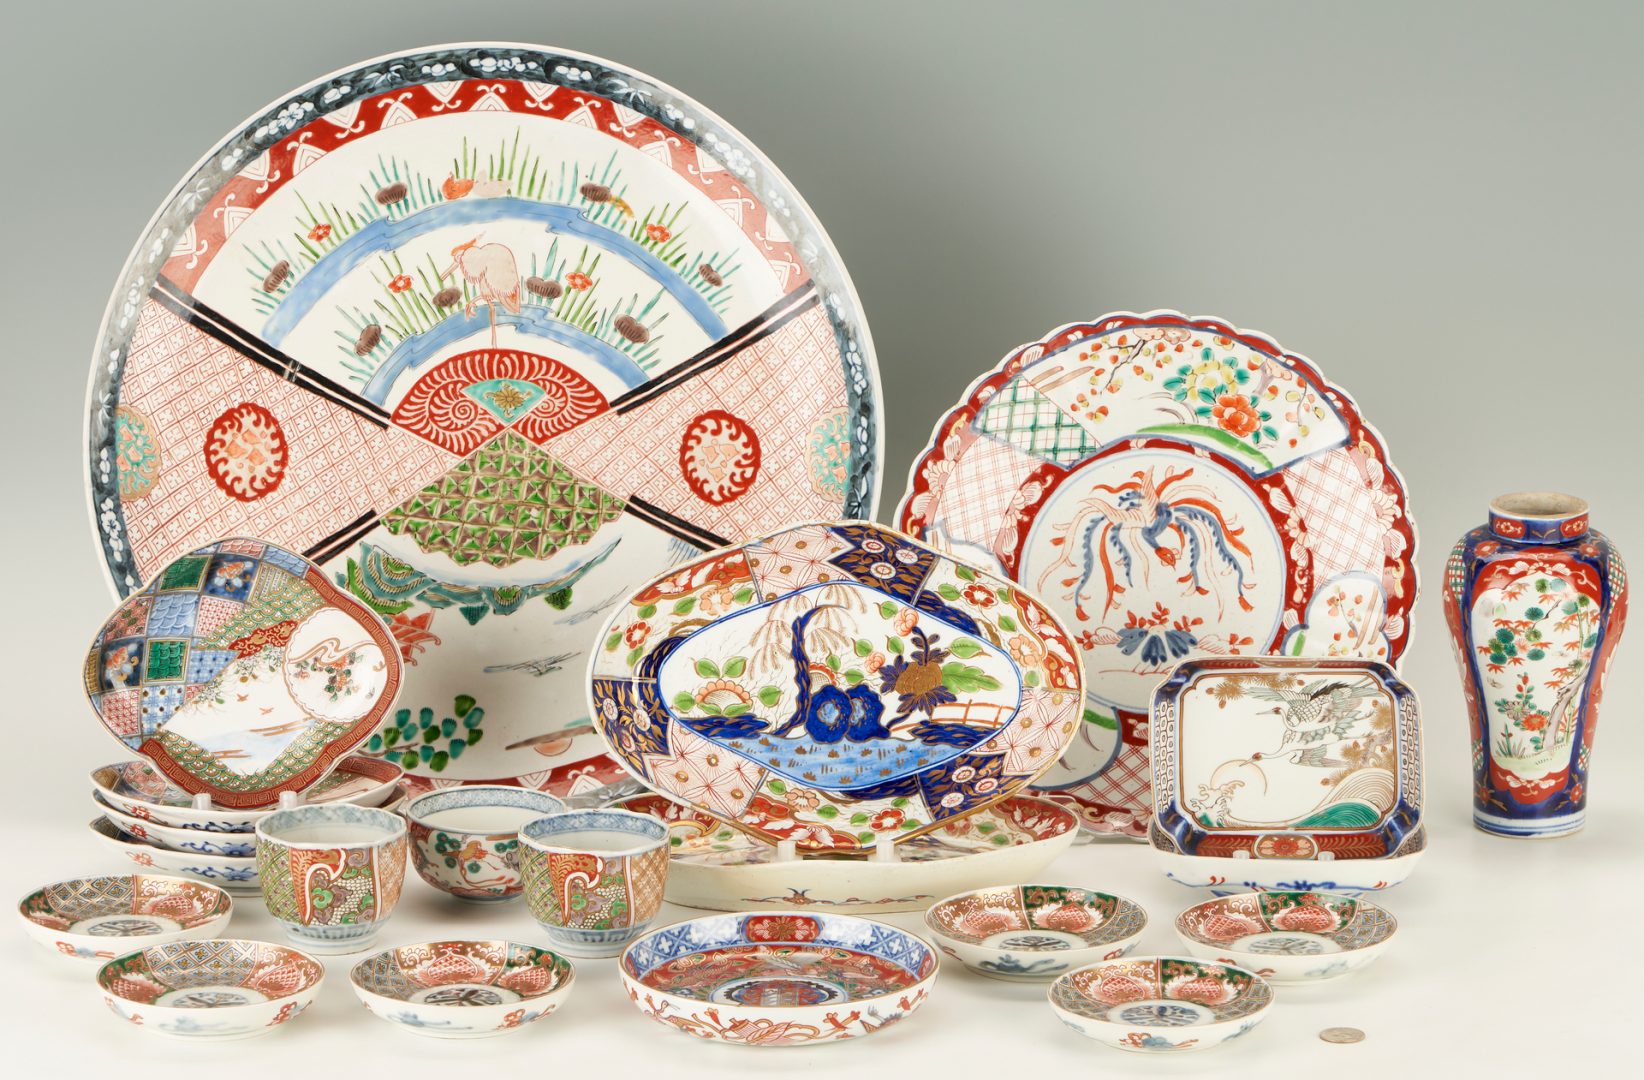 Lot 13: 21 Assorted Imari Porcelain Items incl. Charger